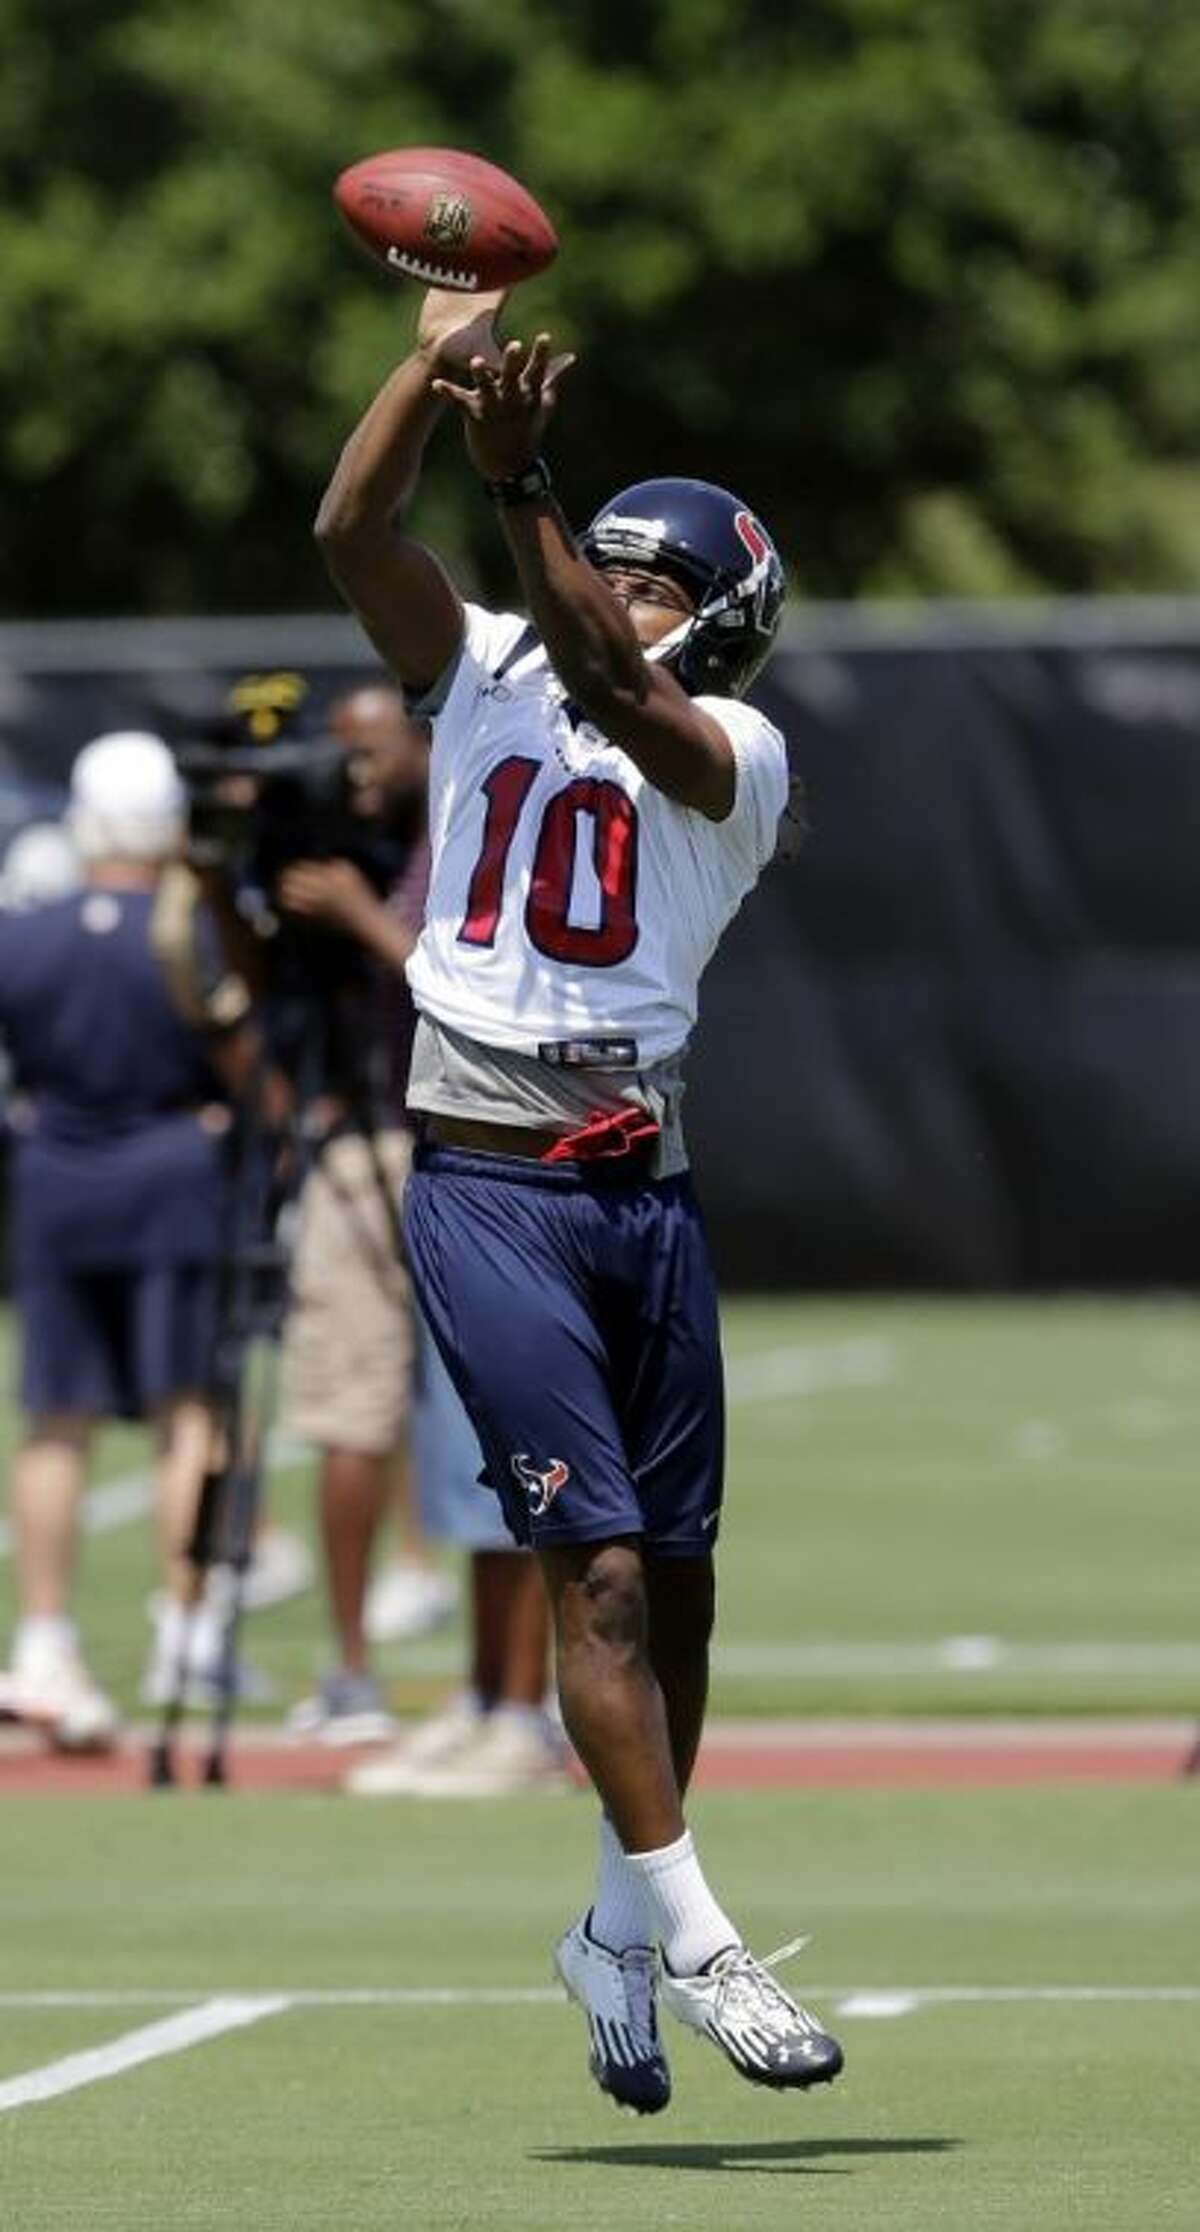 Houston Texans draft pick DeAndre Hopkins catches a pass during an organized team activities session on June 3 in Houston.